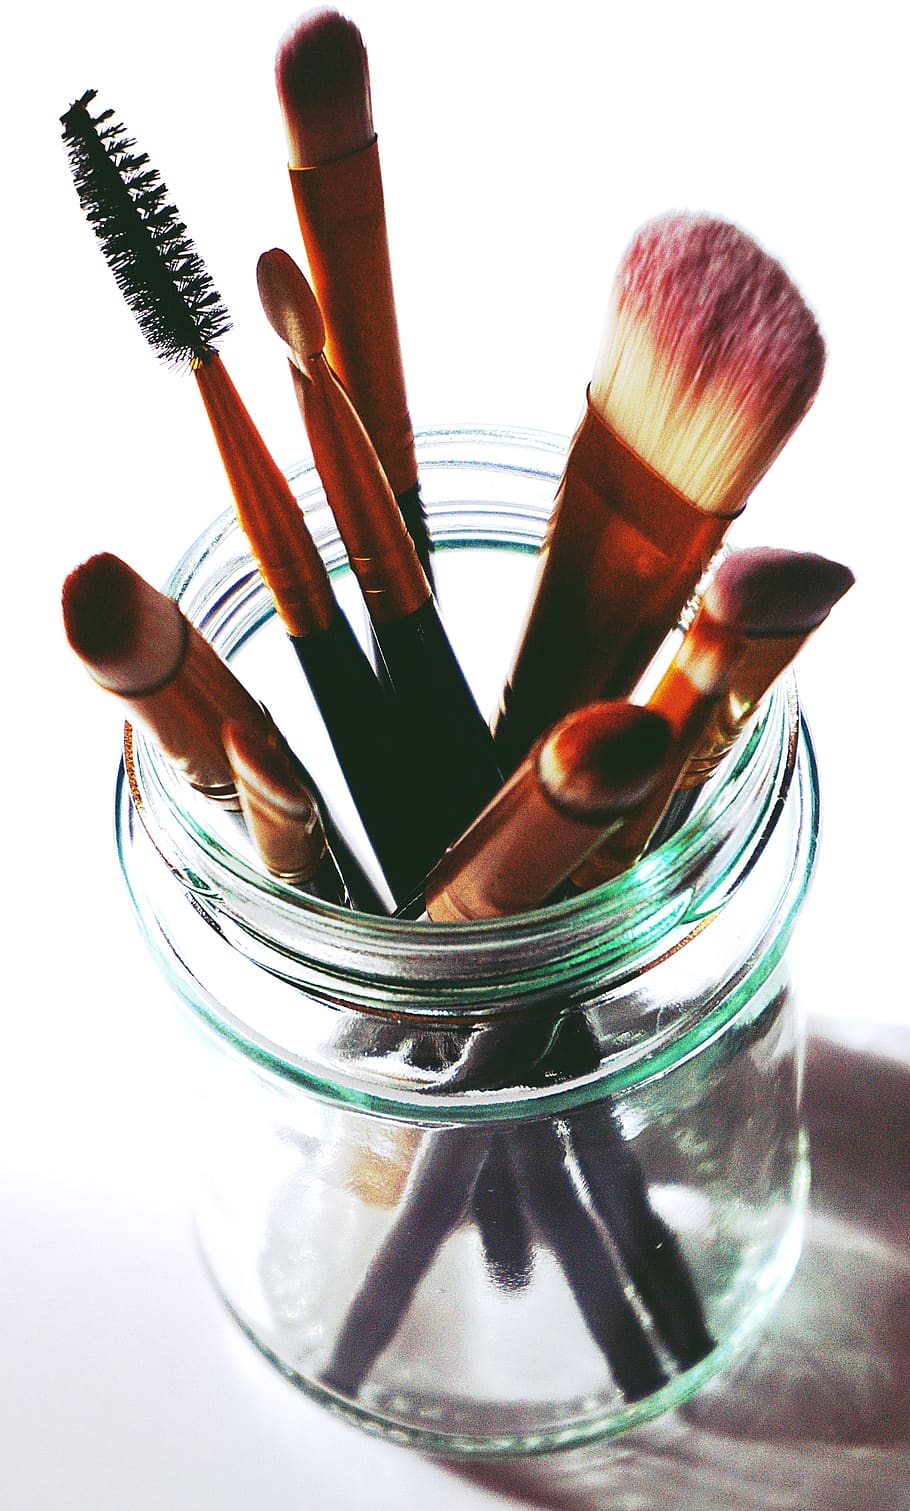 Brown Makeup Brushes in Clear Glass Mason Jar, bottle, close-up